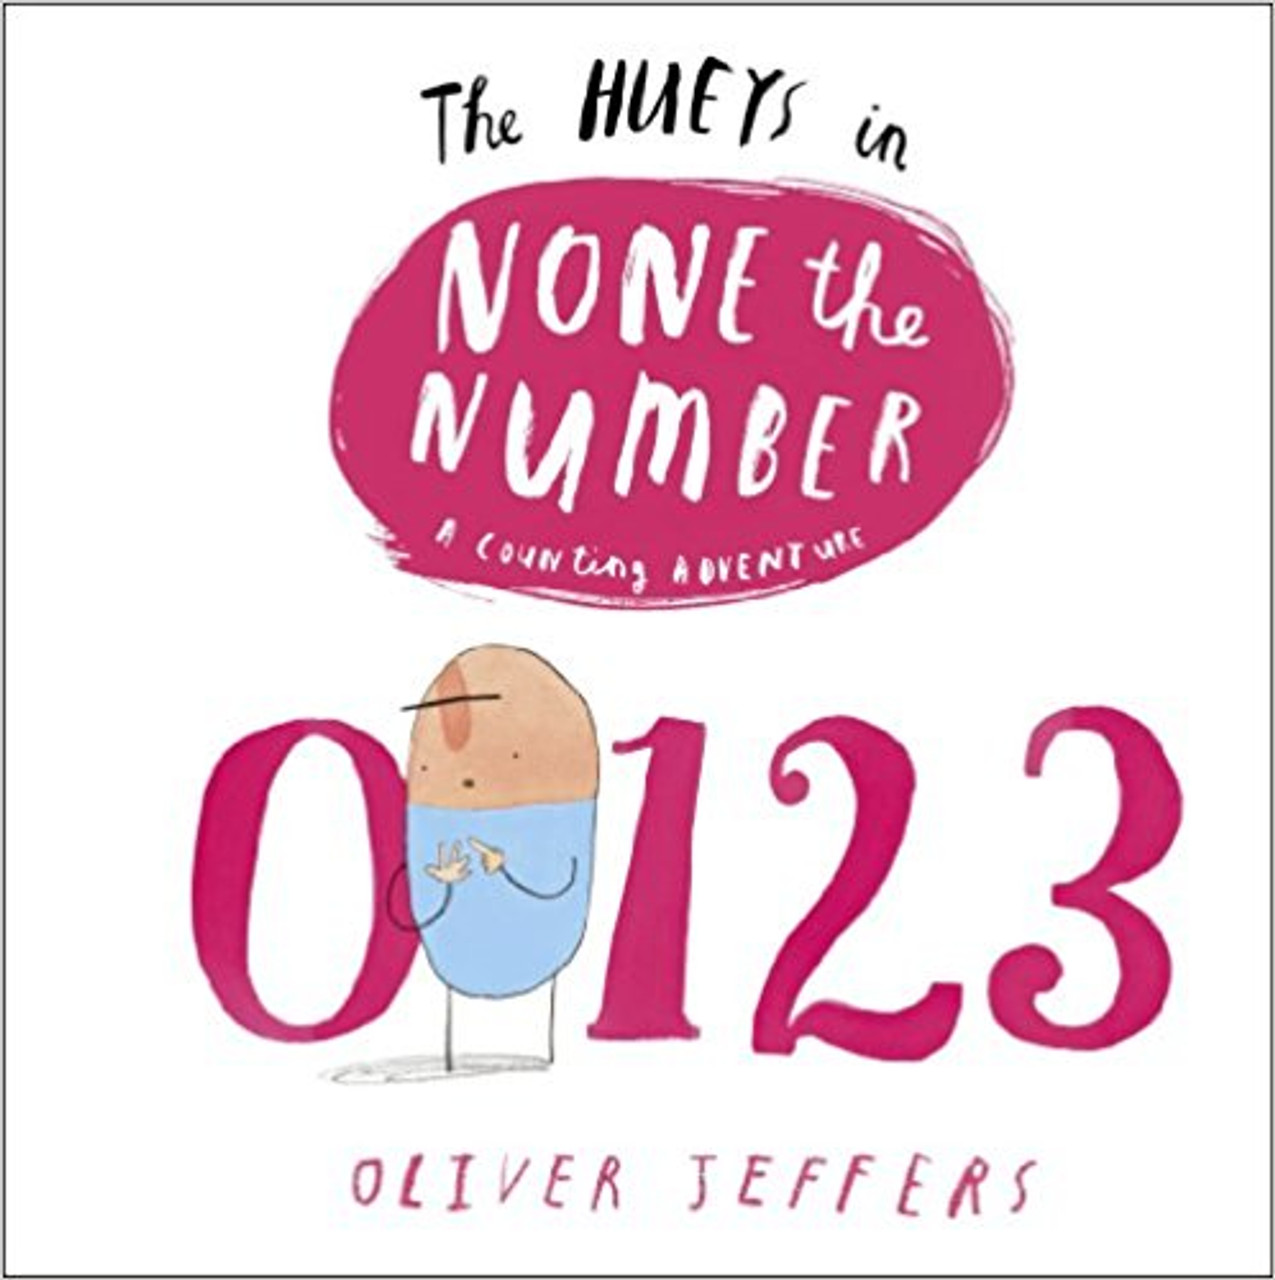 In this funny and accessible counting book by award-winning artist Jeffers, one of the lovable Hueys tries to explain the concept of "none" to another by finding different numbers of items, one through 10, then taking them all away. Full color